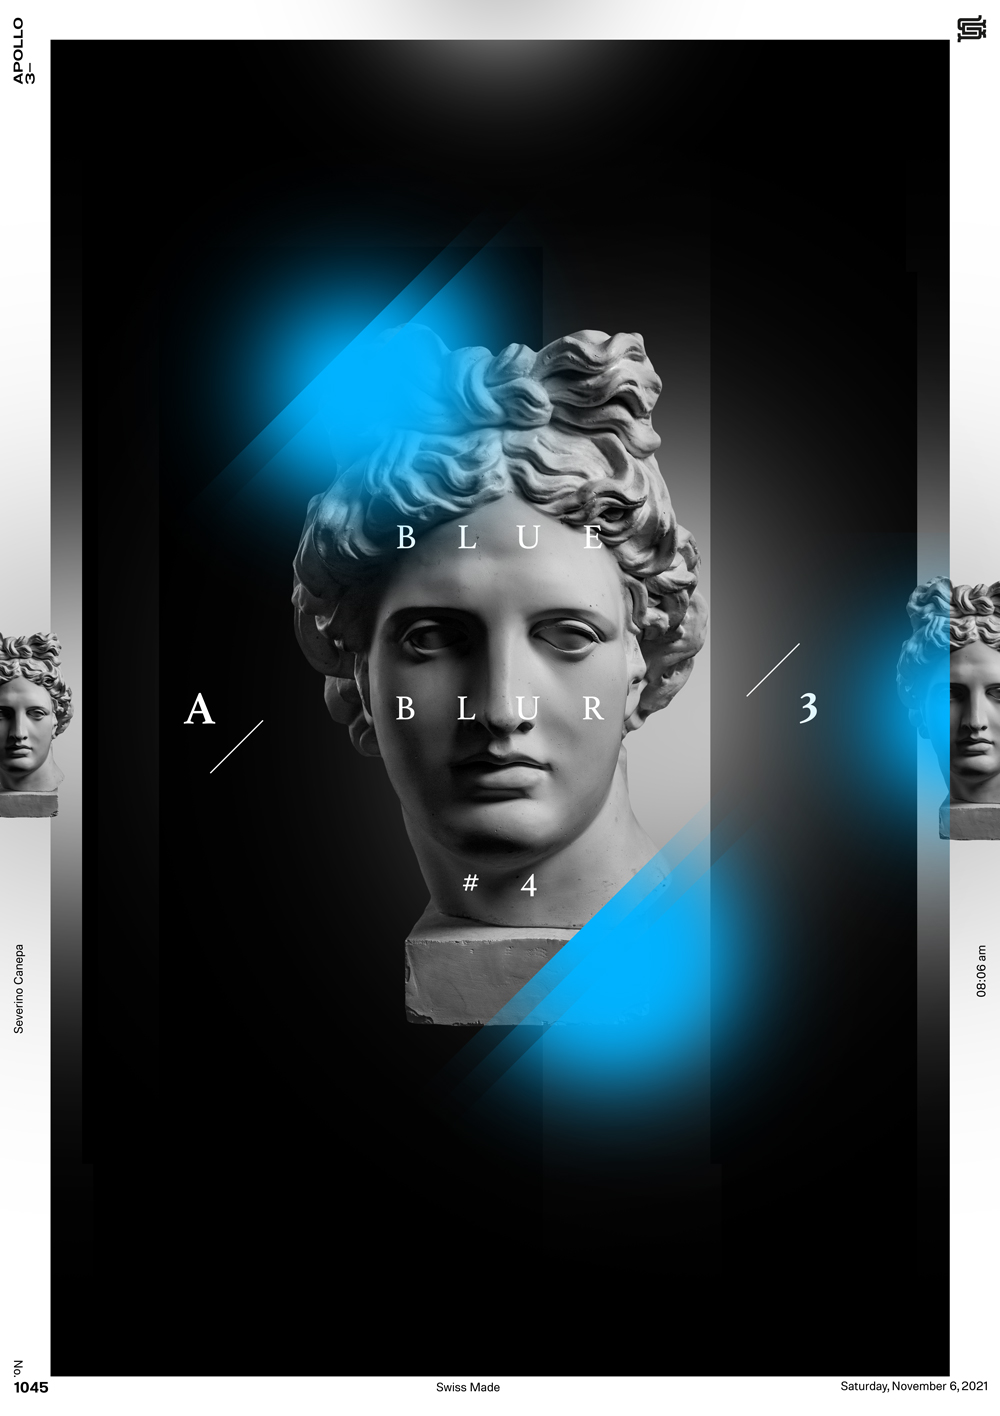 Visual design made with the picture of Apollo and blur shapes